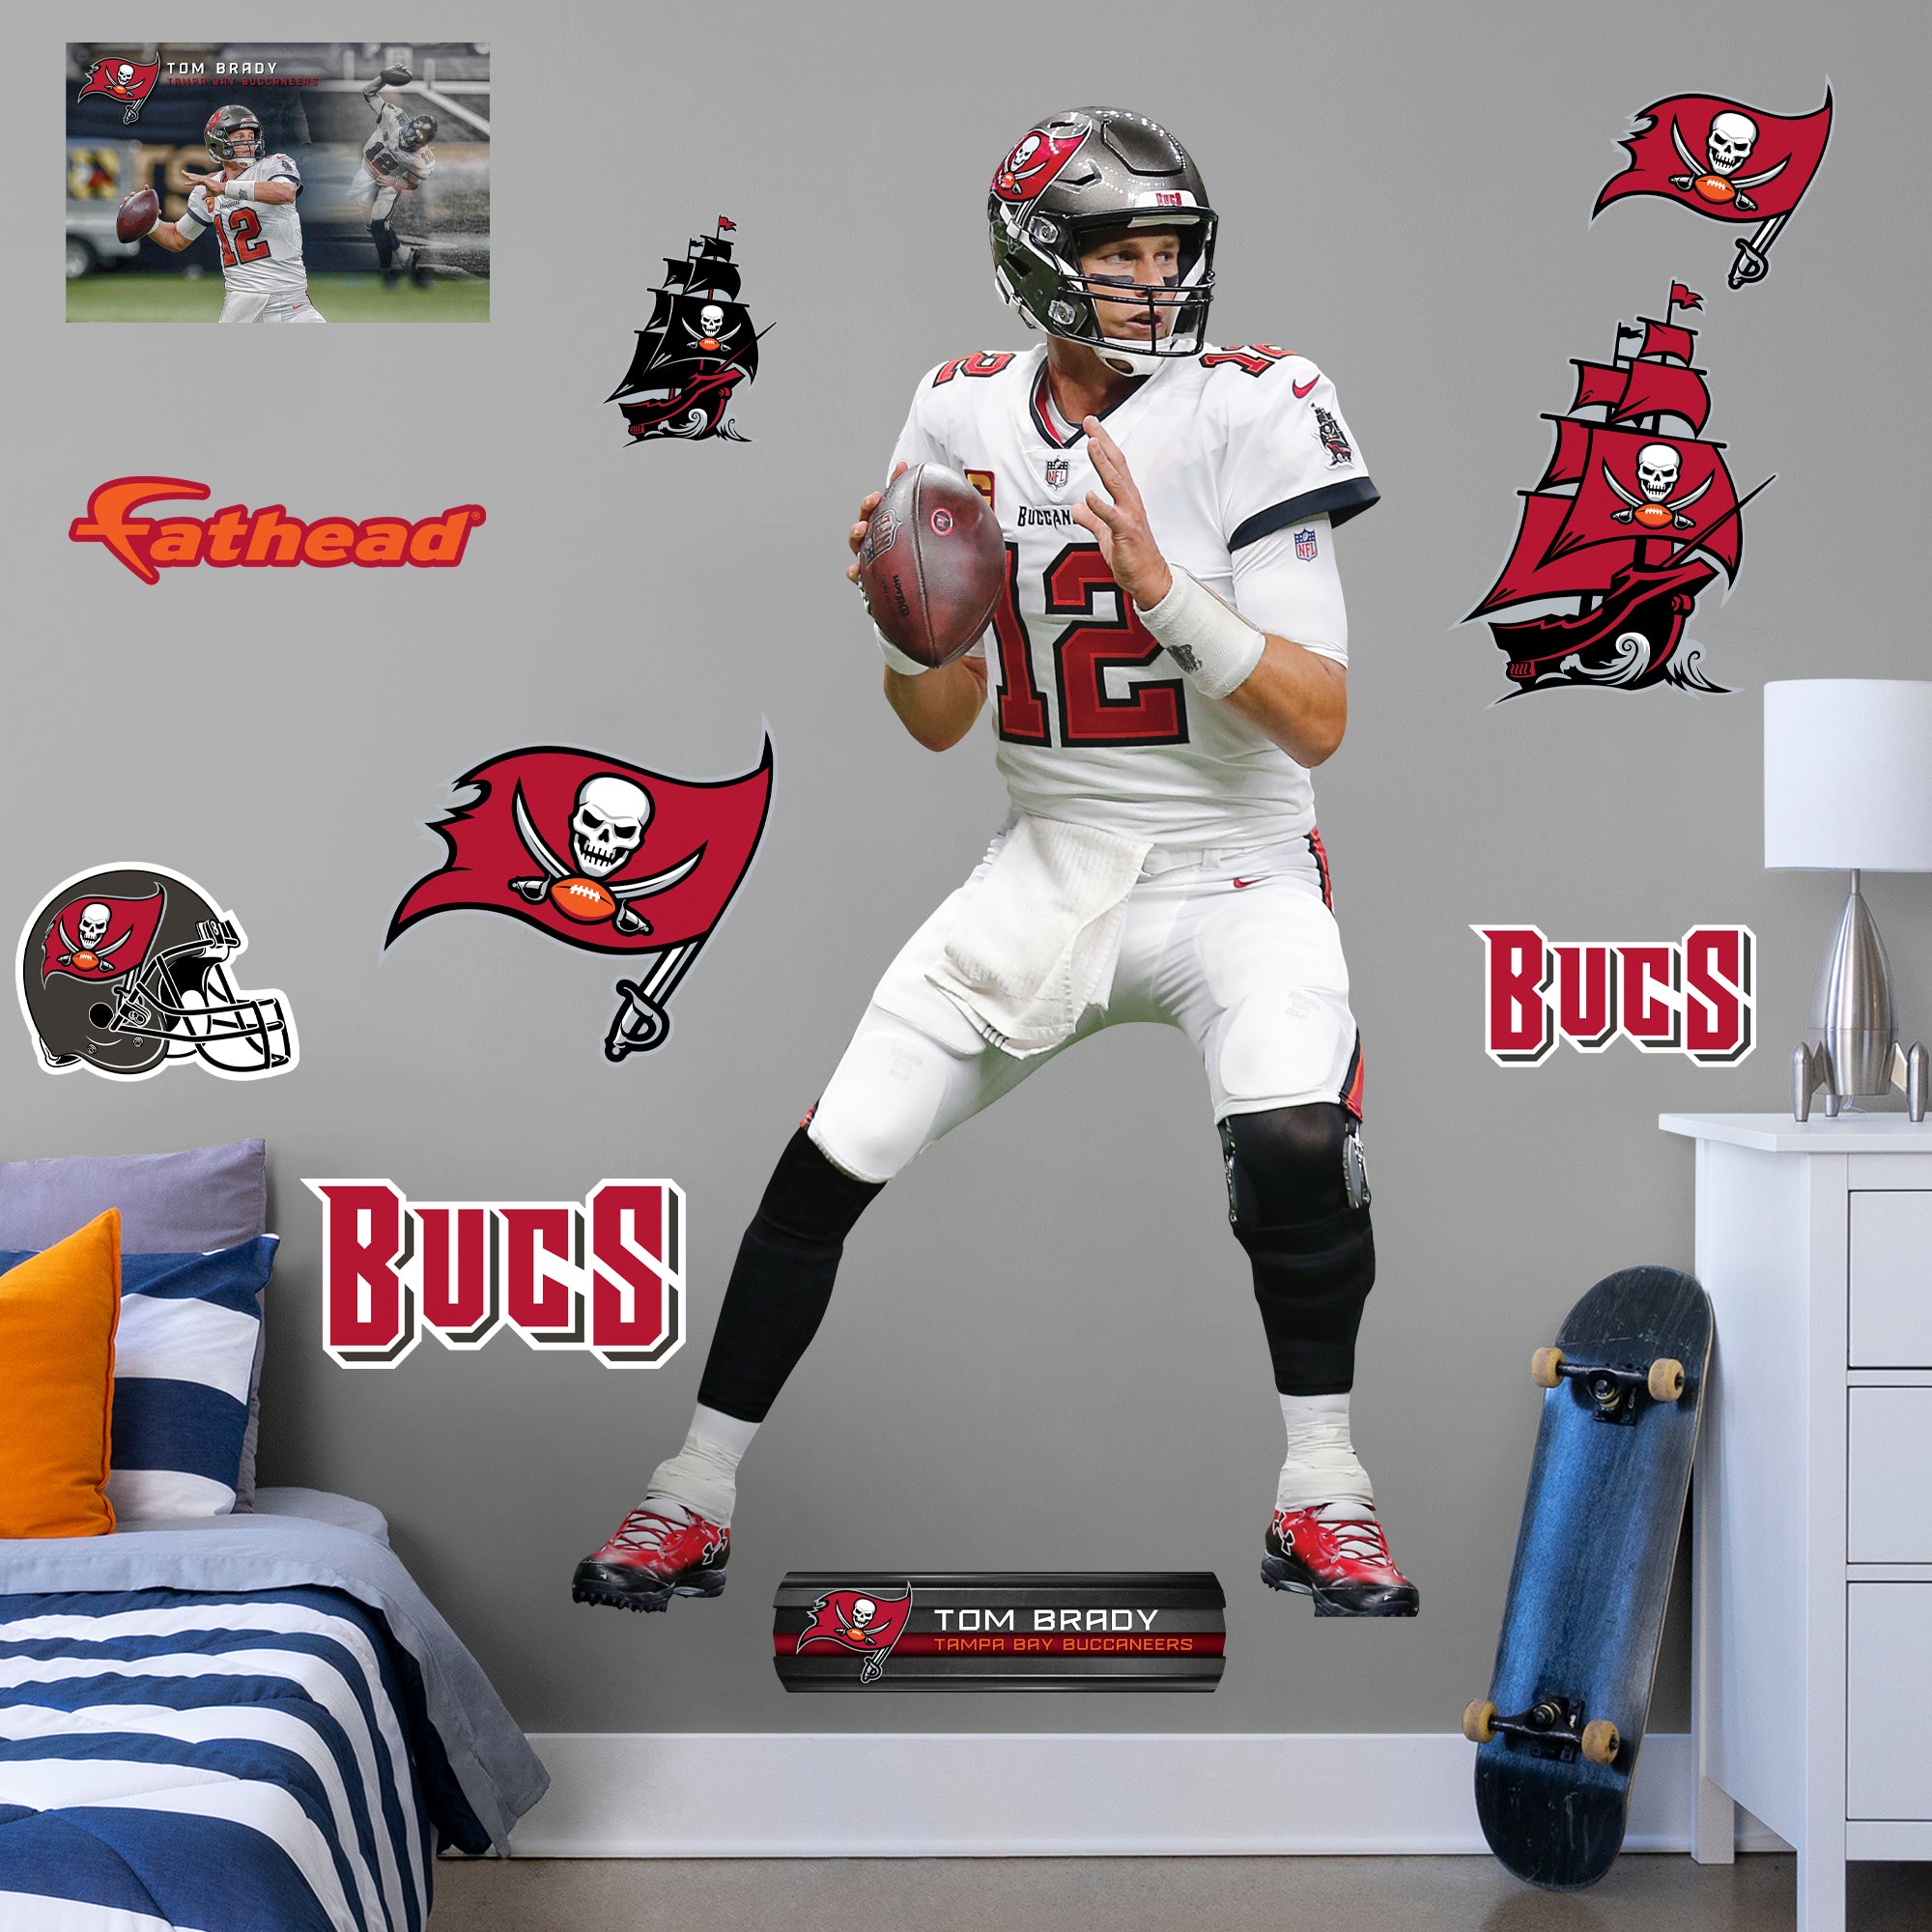 Tom Brady: Officially Licensed NFL Removable Wall Decal Life-Size Athlete + 10 Decals (48"W x 78"H) by Fathead | Vinyl